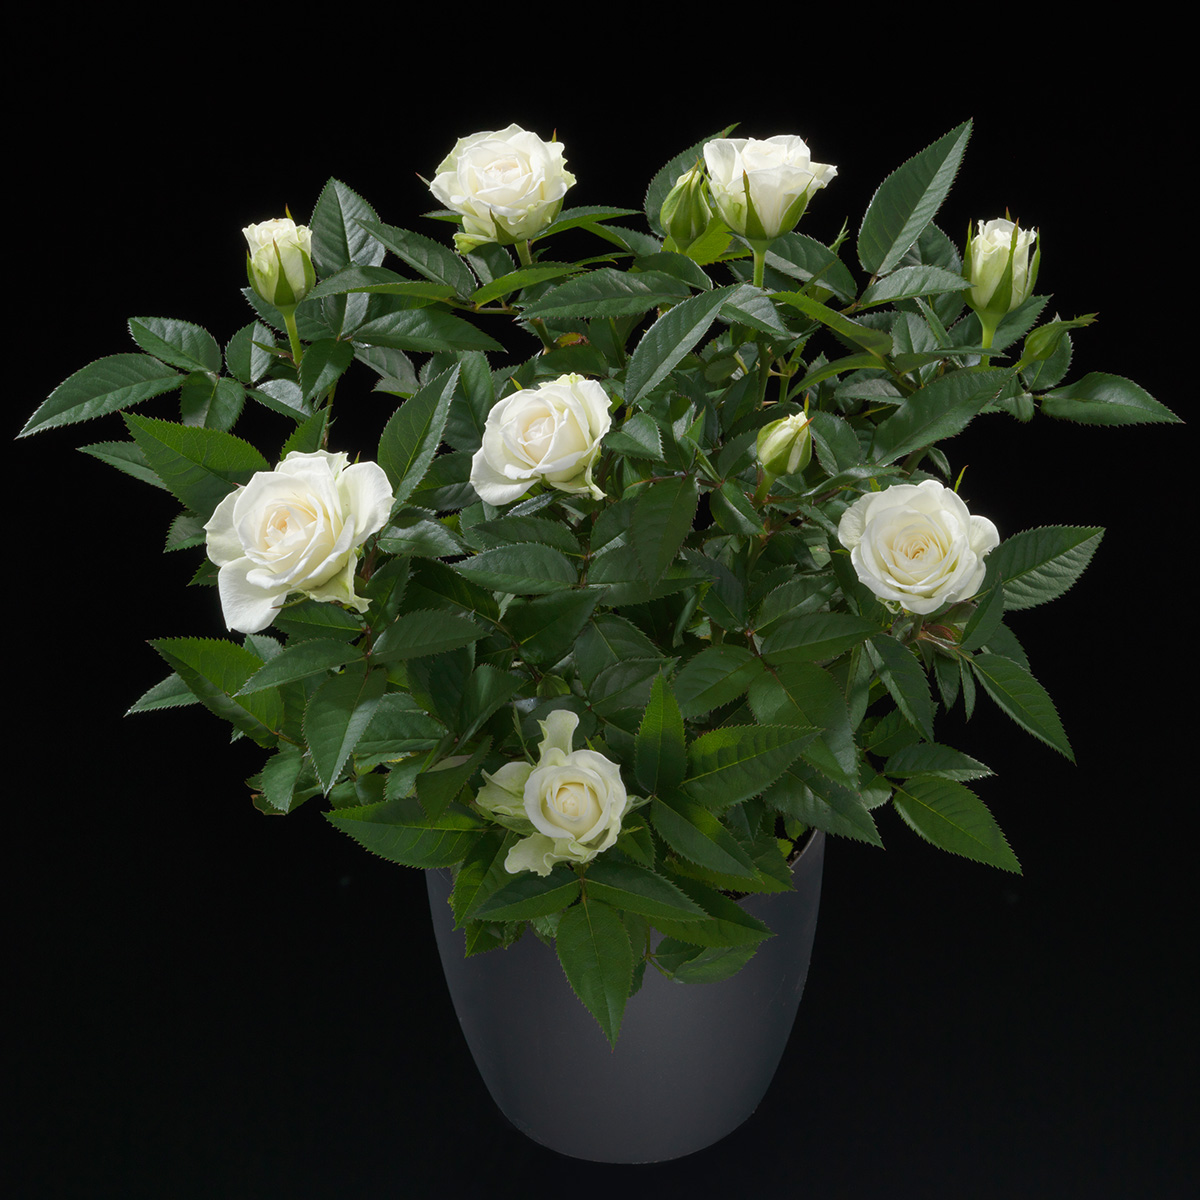 What Do Growers Think of Jewel Pot Roses From De Ruiter 43 Rose White Jewel